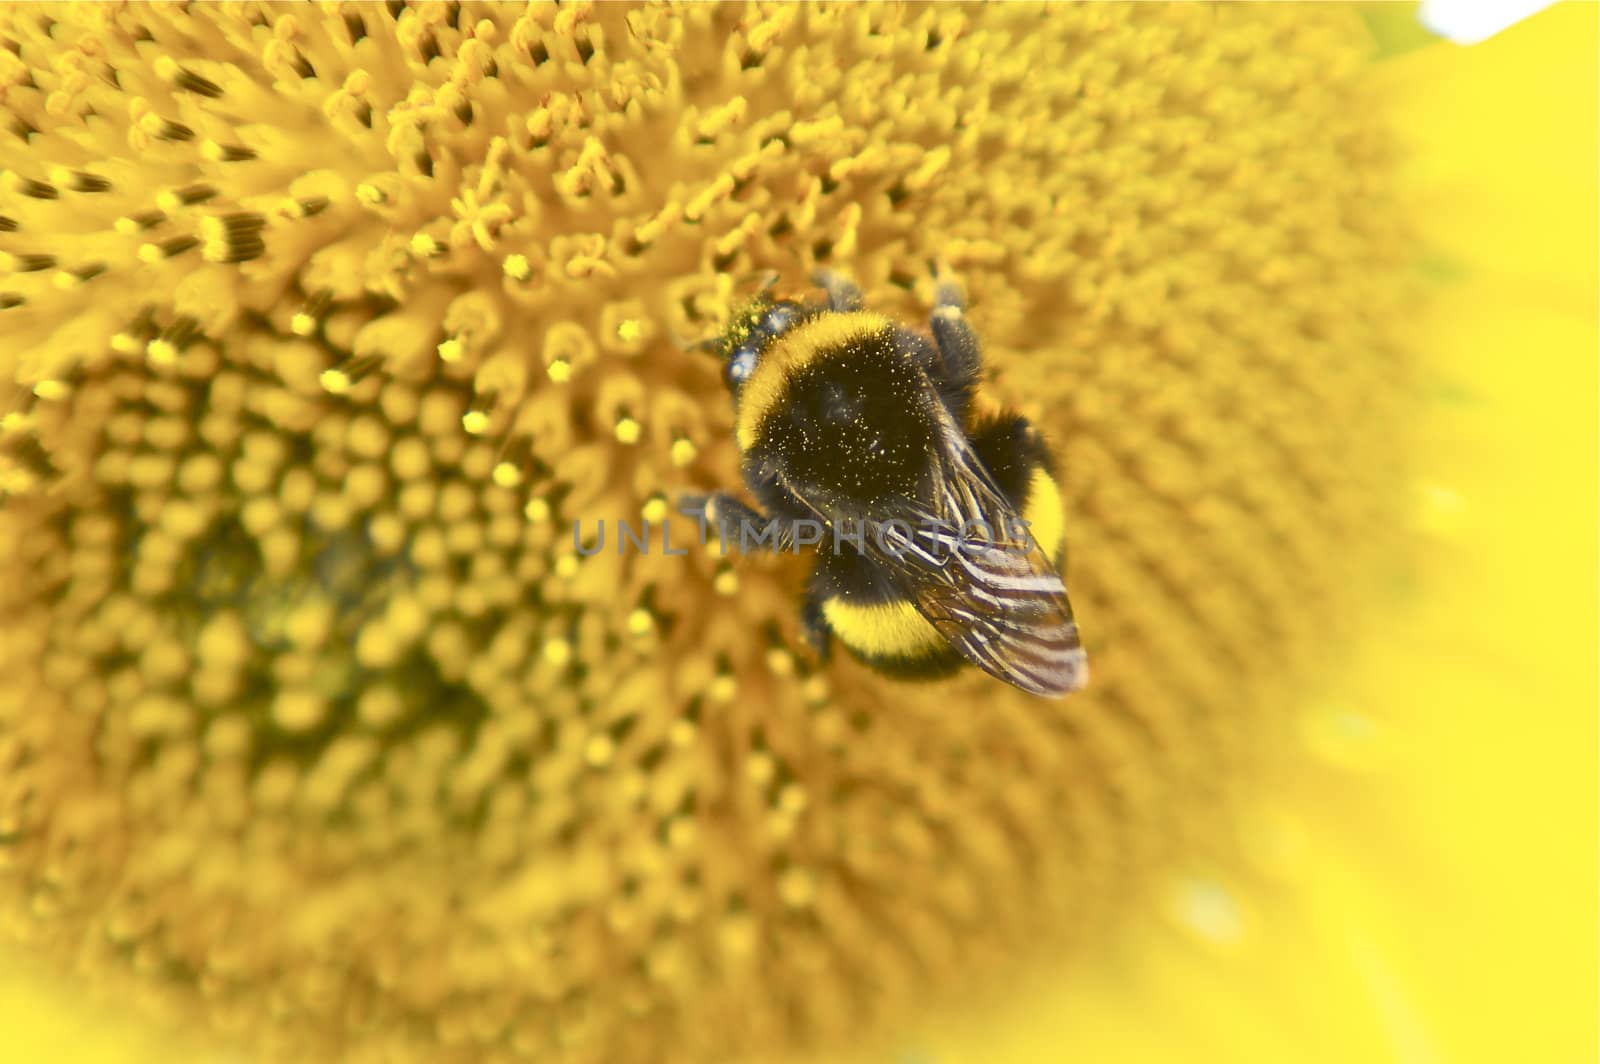 Extremely close up centre of sunflower facing into camera, with a bumble bee, with copy space.